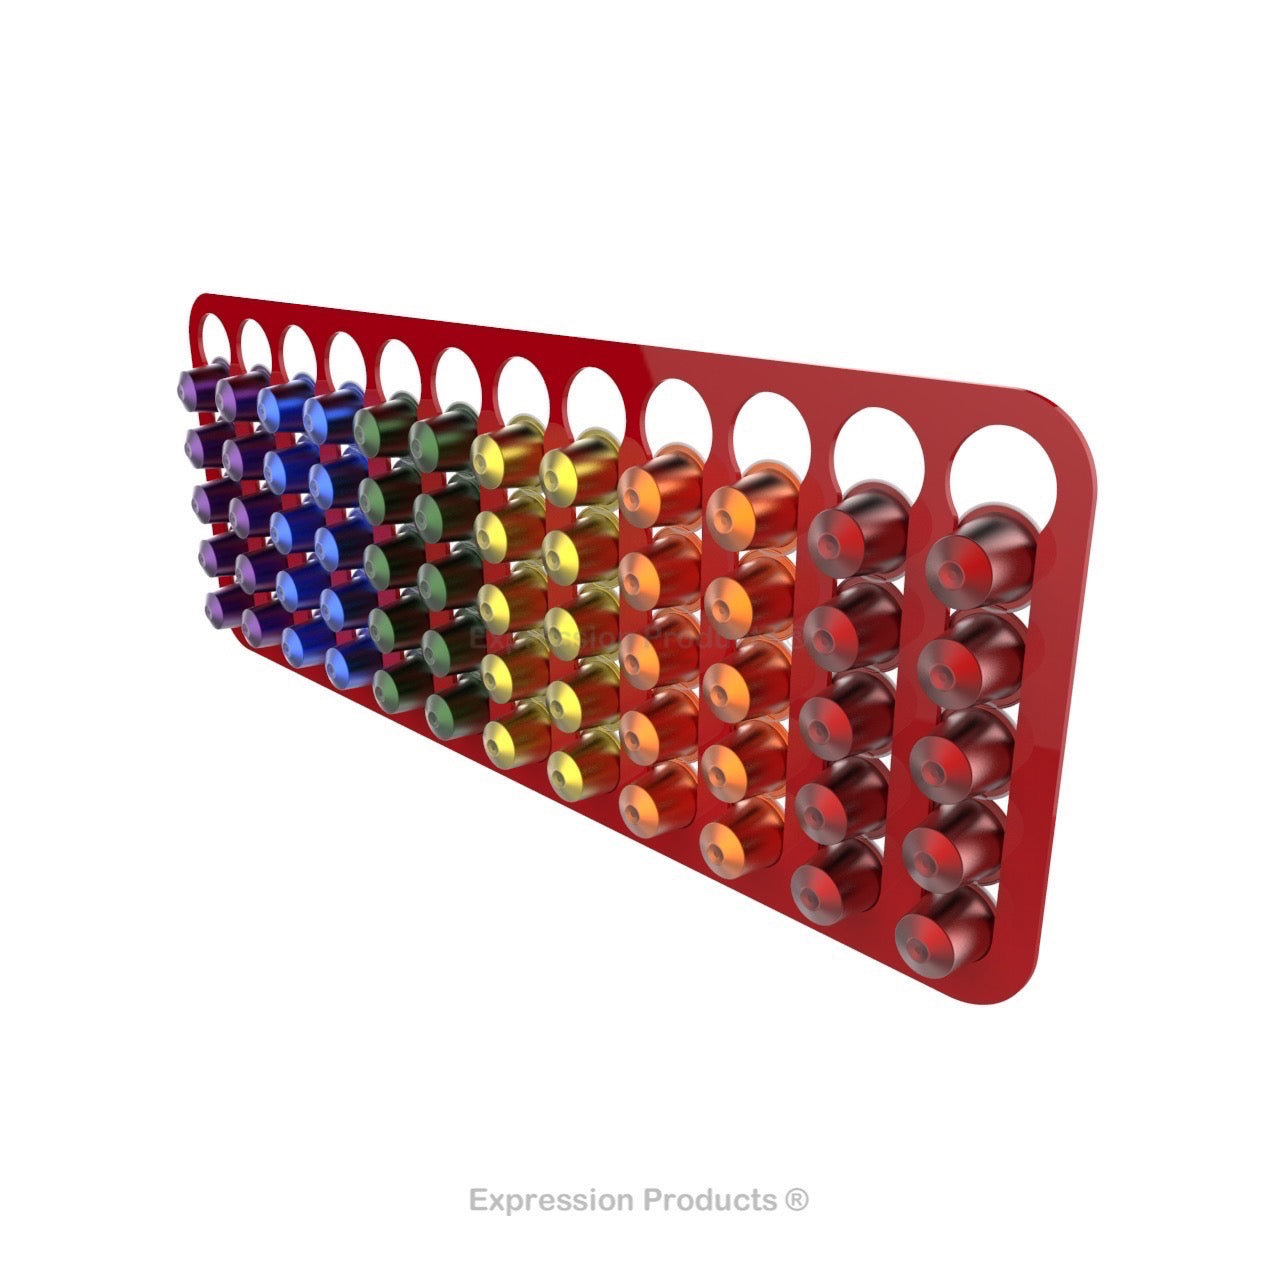 Magnetic Nespresso Original Line coffee pod holder shown in red holding 60 pods